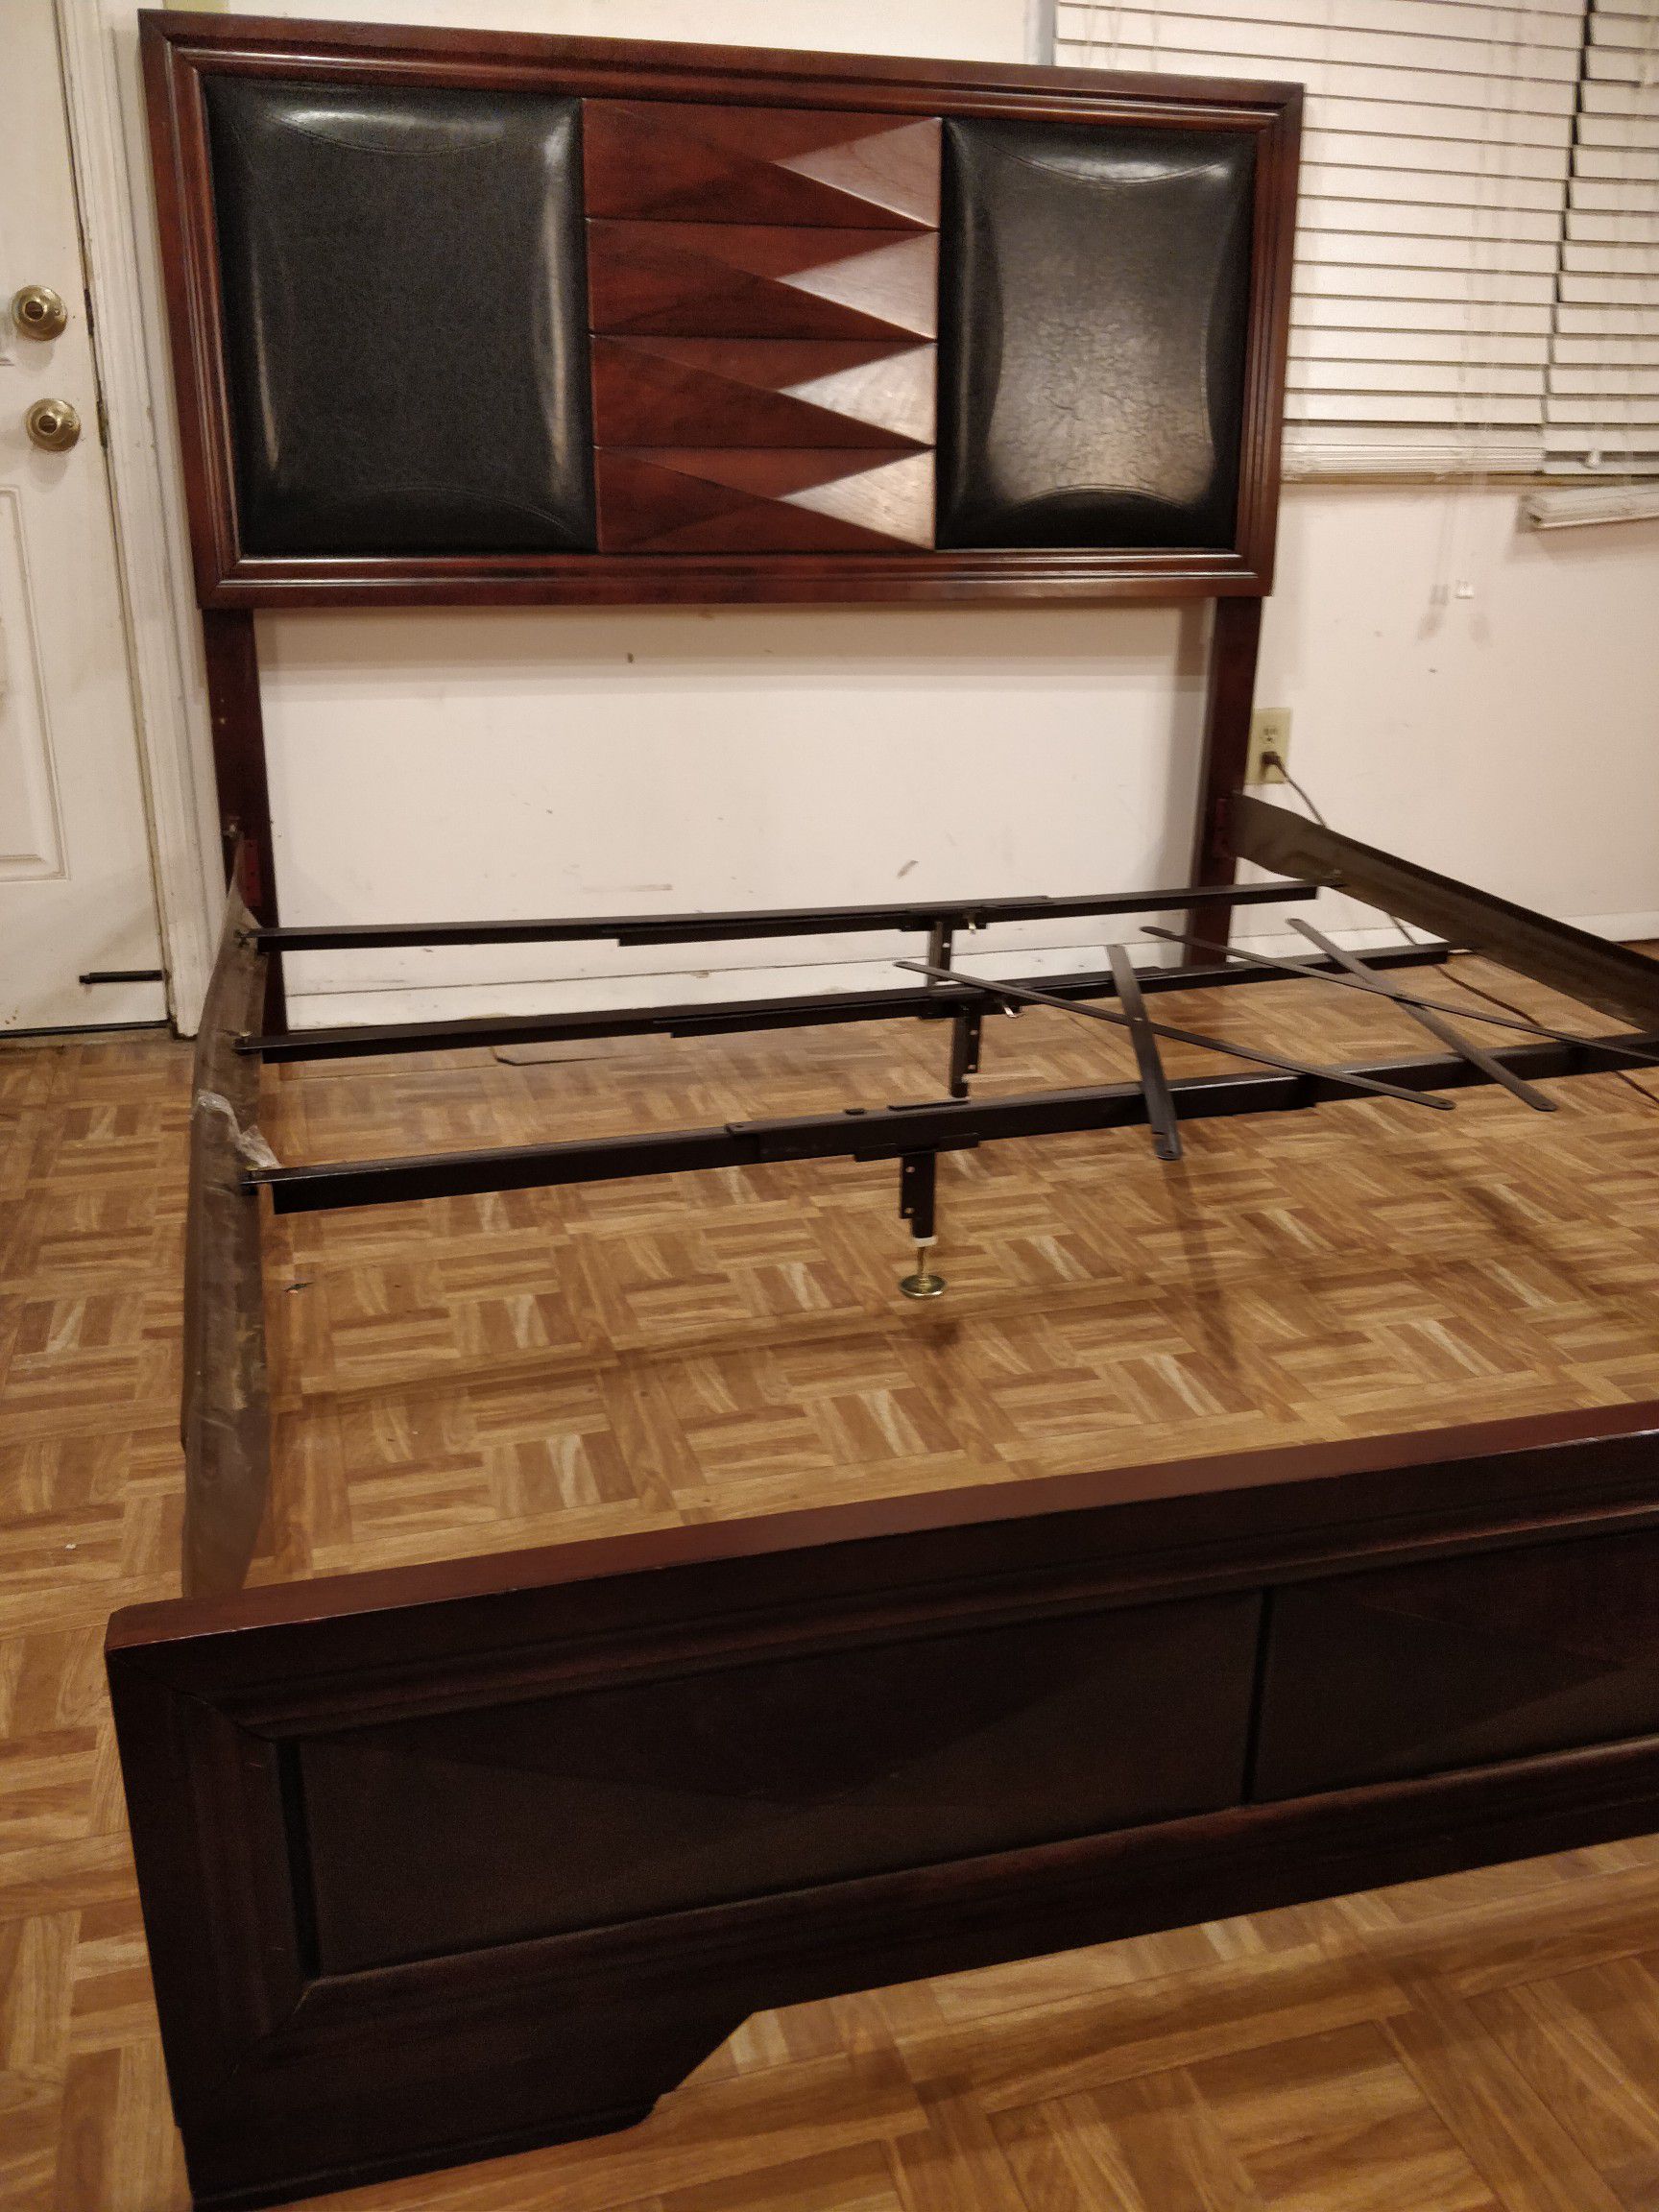 Nice wooden Queen bed frame in very good condition, pet free smoke free.